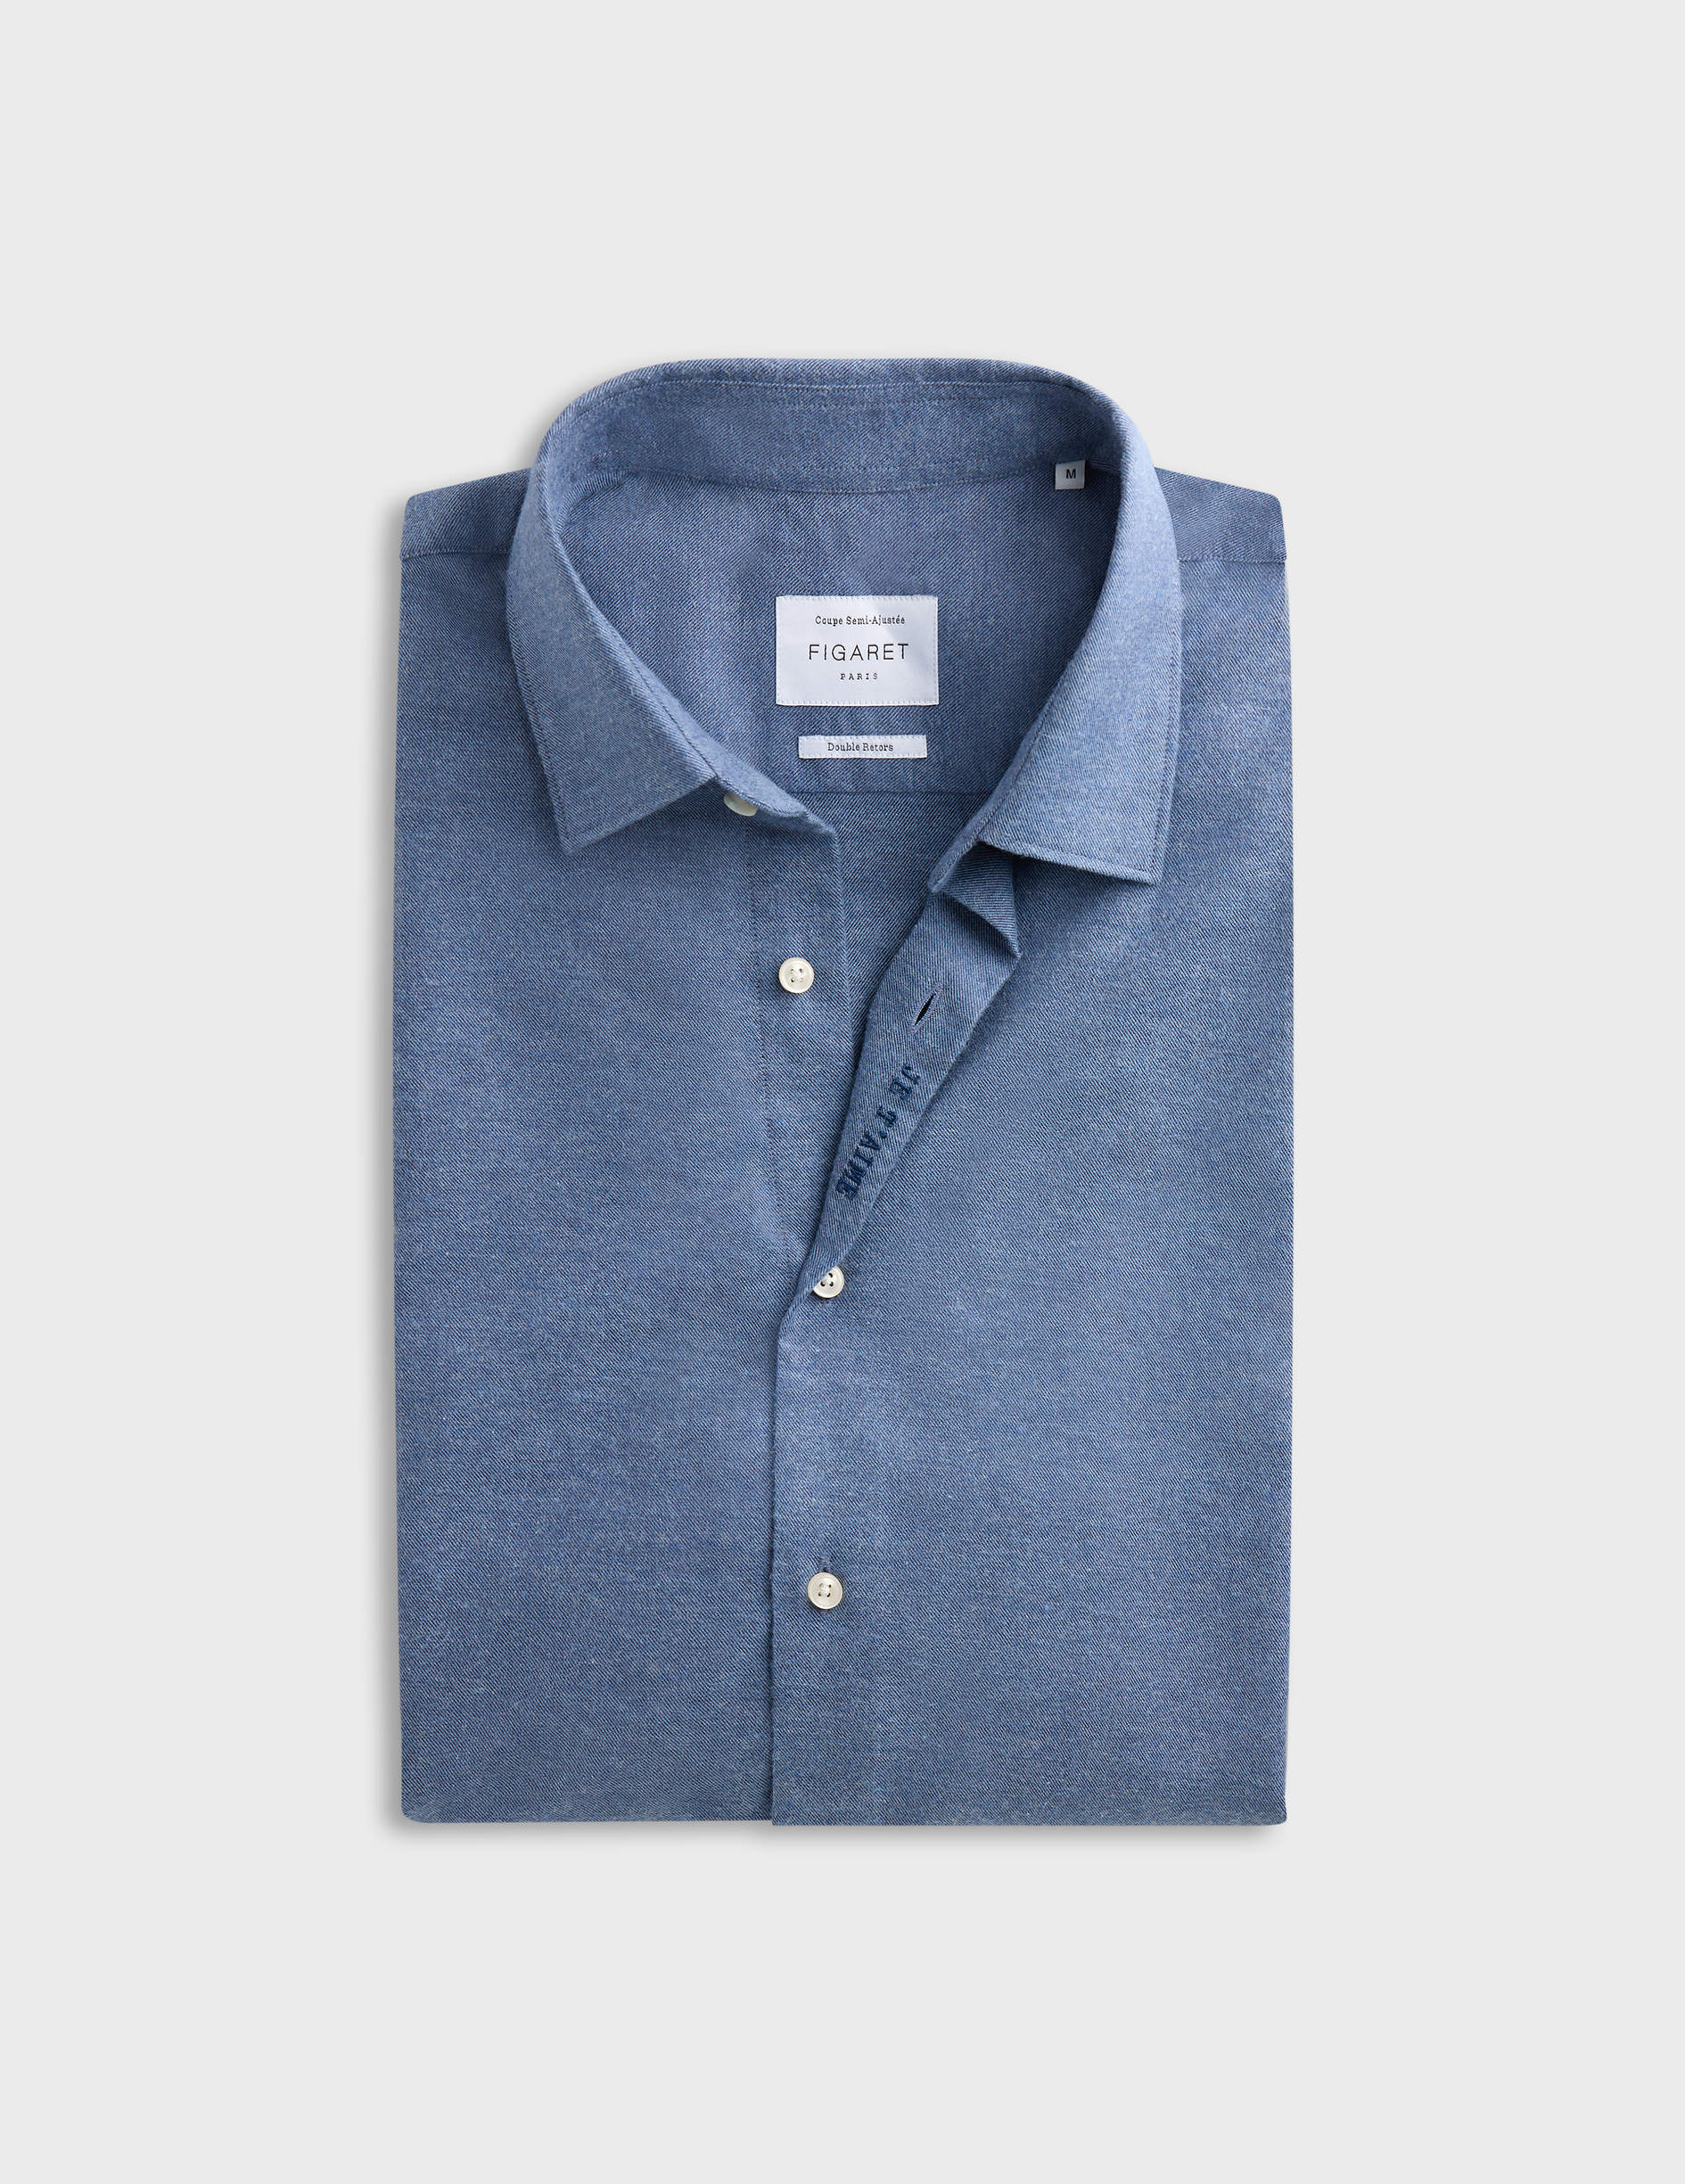 Blue cotton and cashmere "Je t'aime" shirt with navy embroidery - Flannel - Figaret Collar